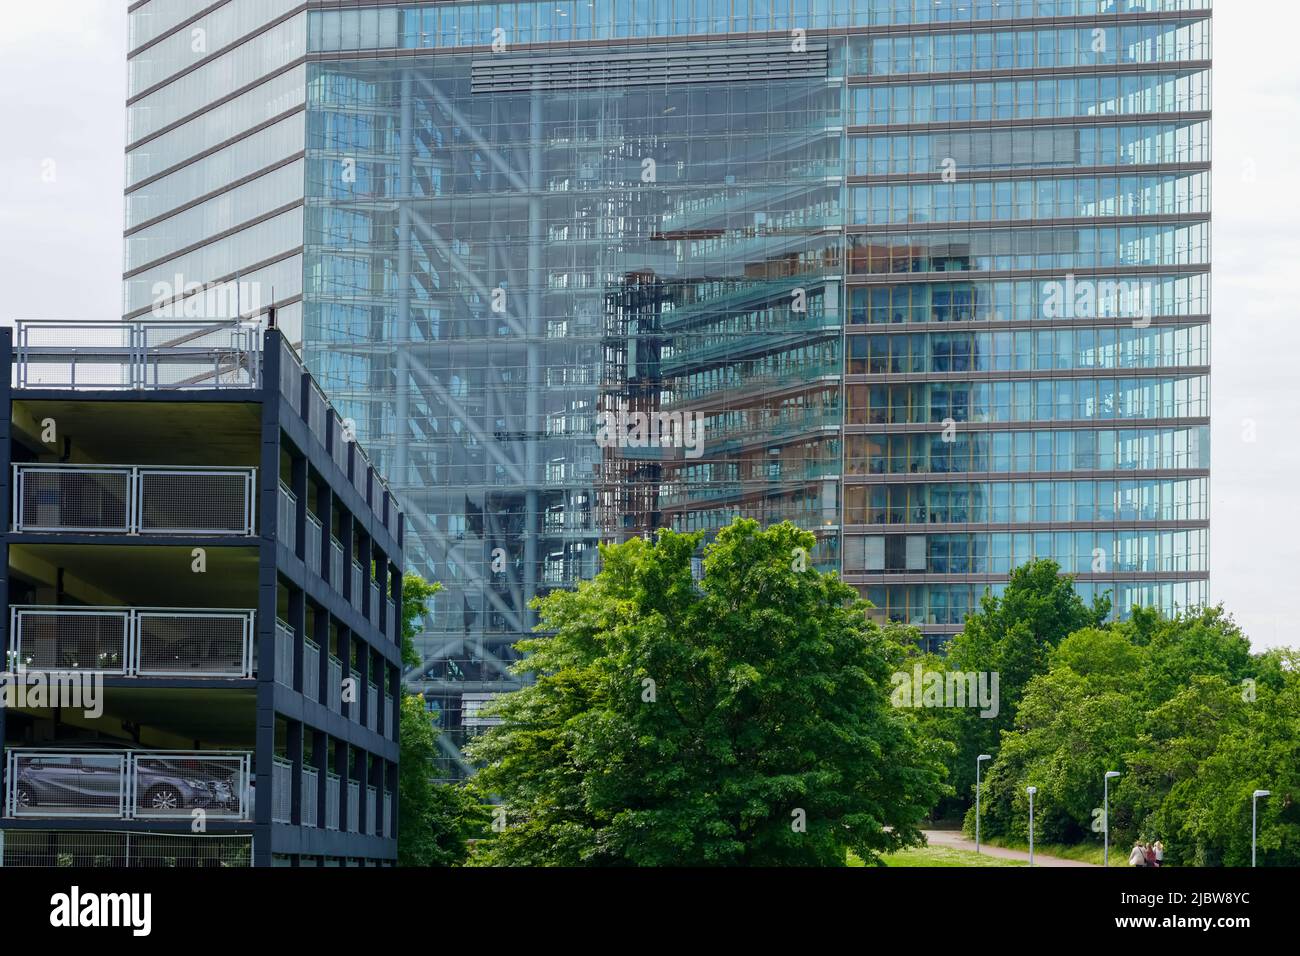 The Stadttor is a high-rise office building in the Unterbilk district of Düsseldorf, North Rhine-Westphalia, Germany, 23.5.22 Stock Photo